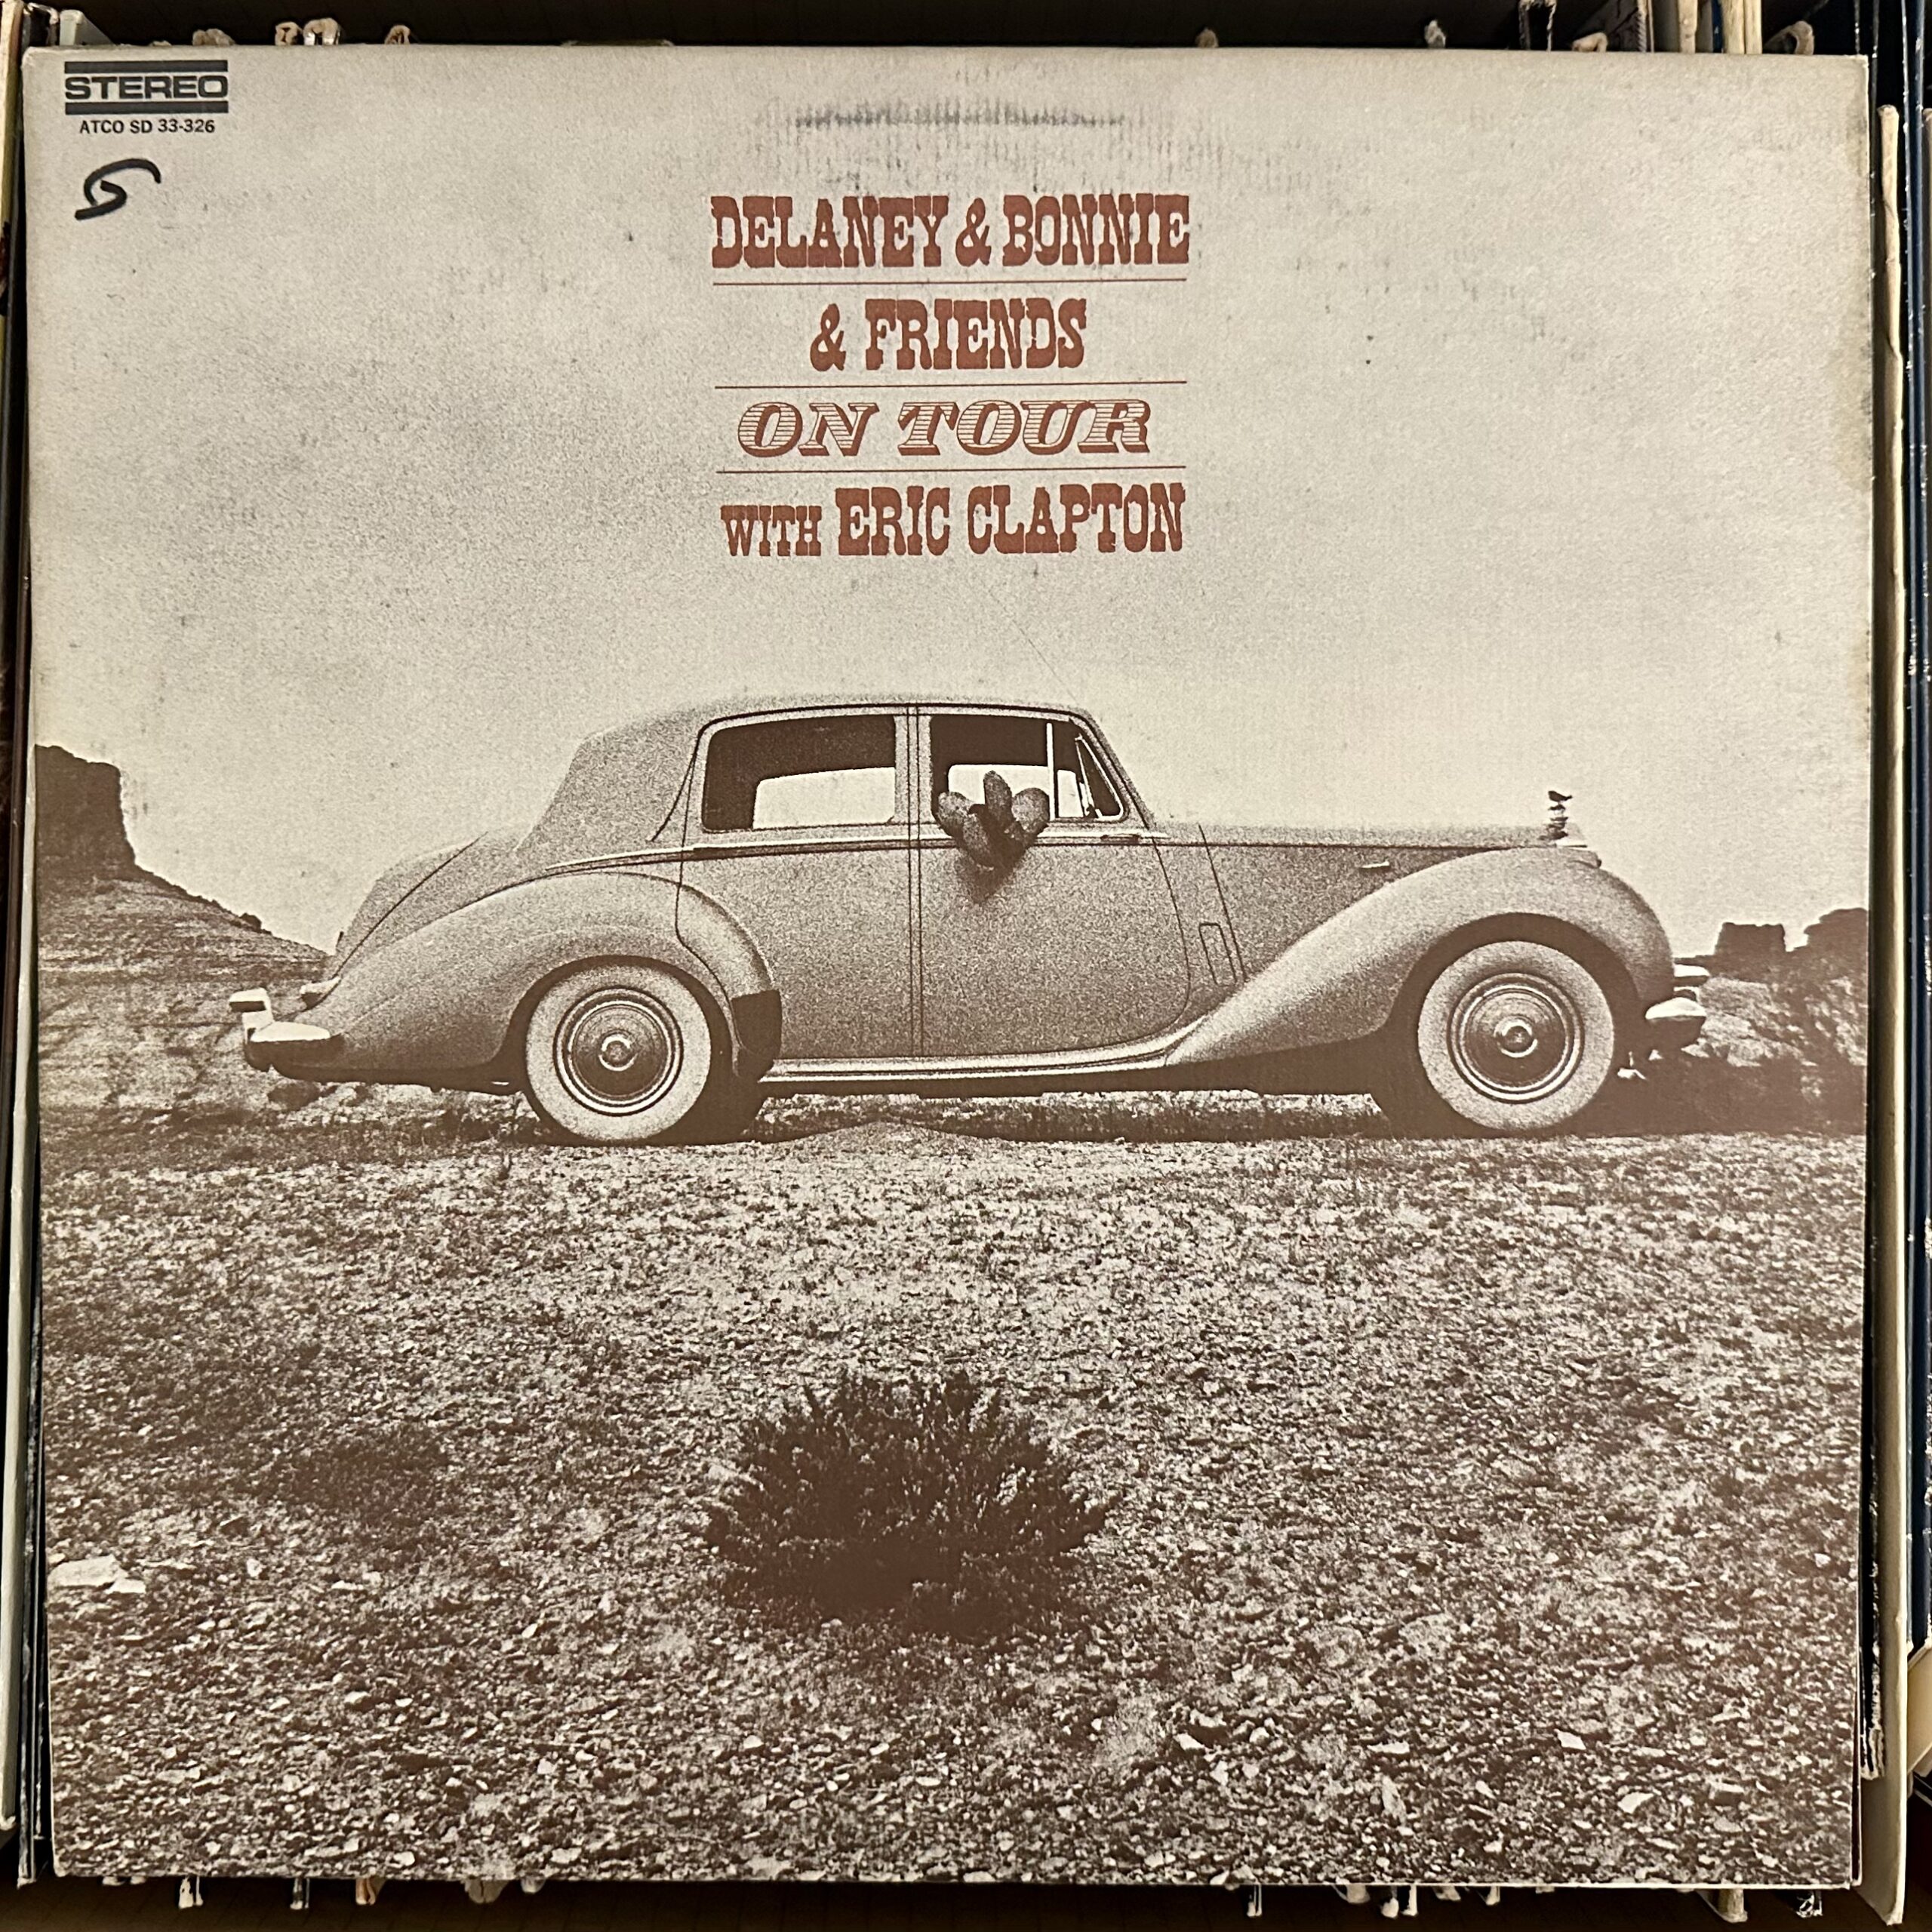 On Tour with Eric Clapton by Delaney & Bonnie